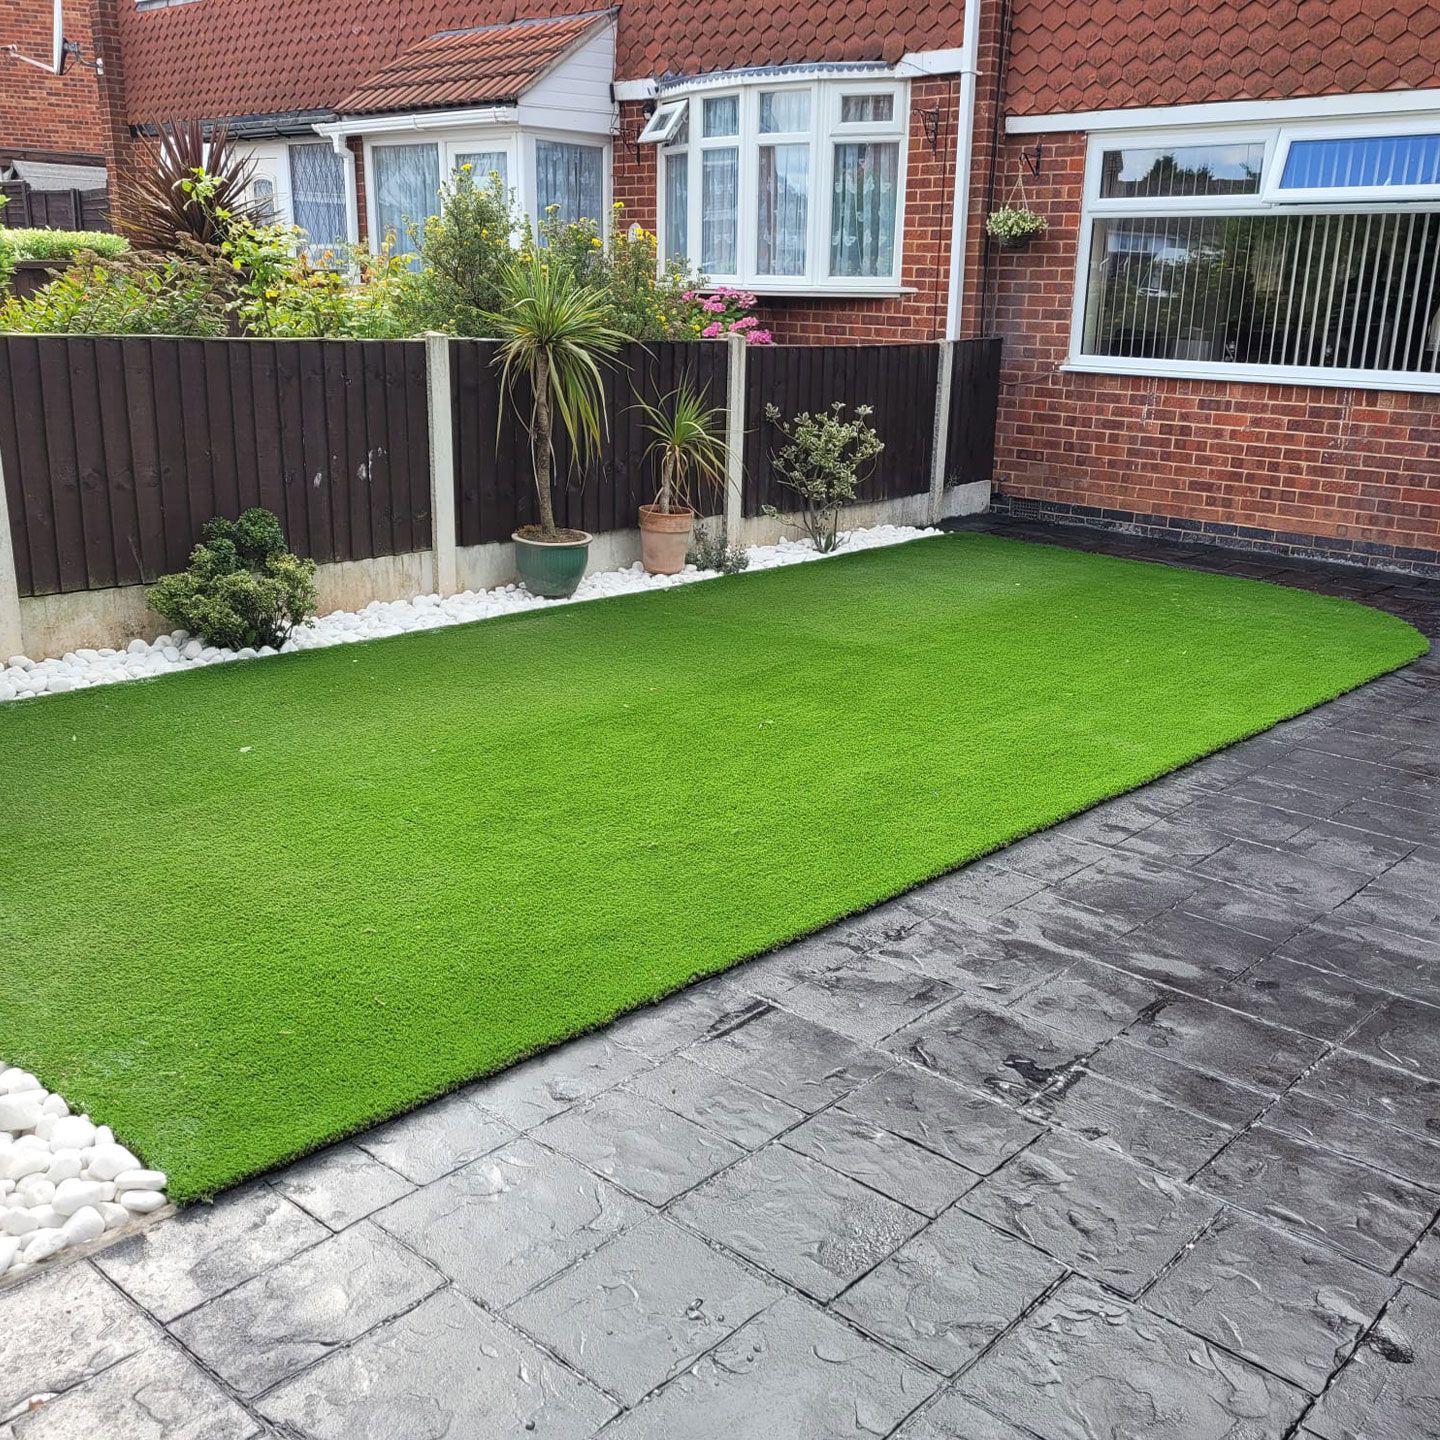 landscaping in Burbage showing new artificial grass and patterned concrete paving